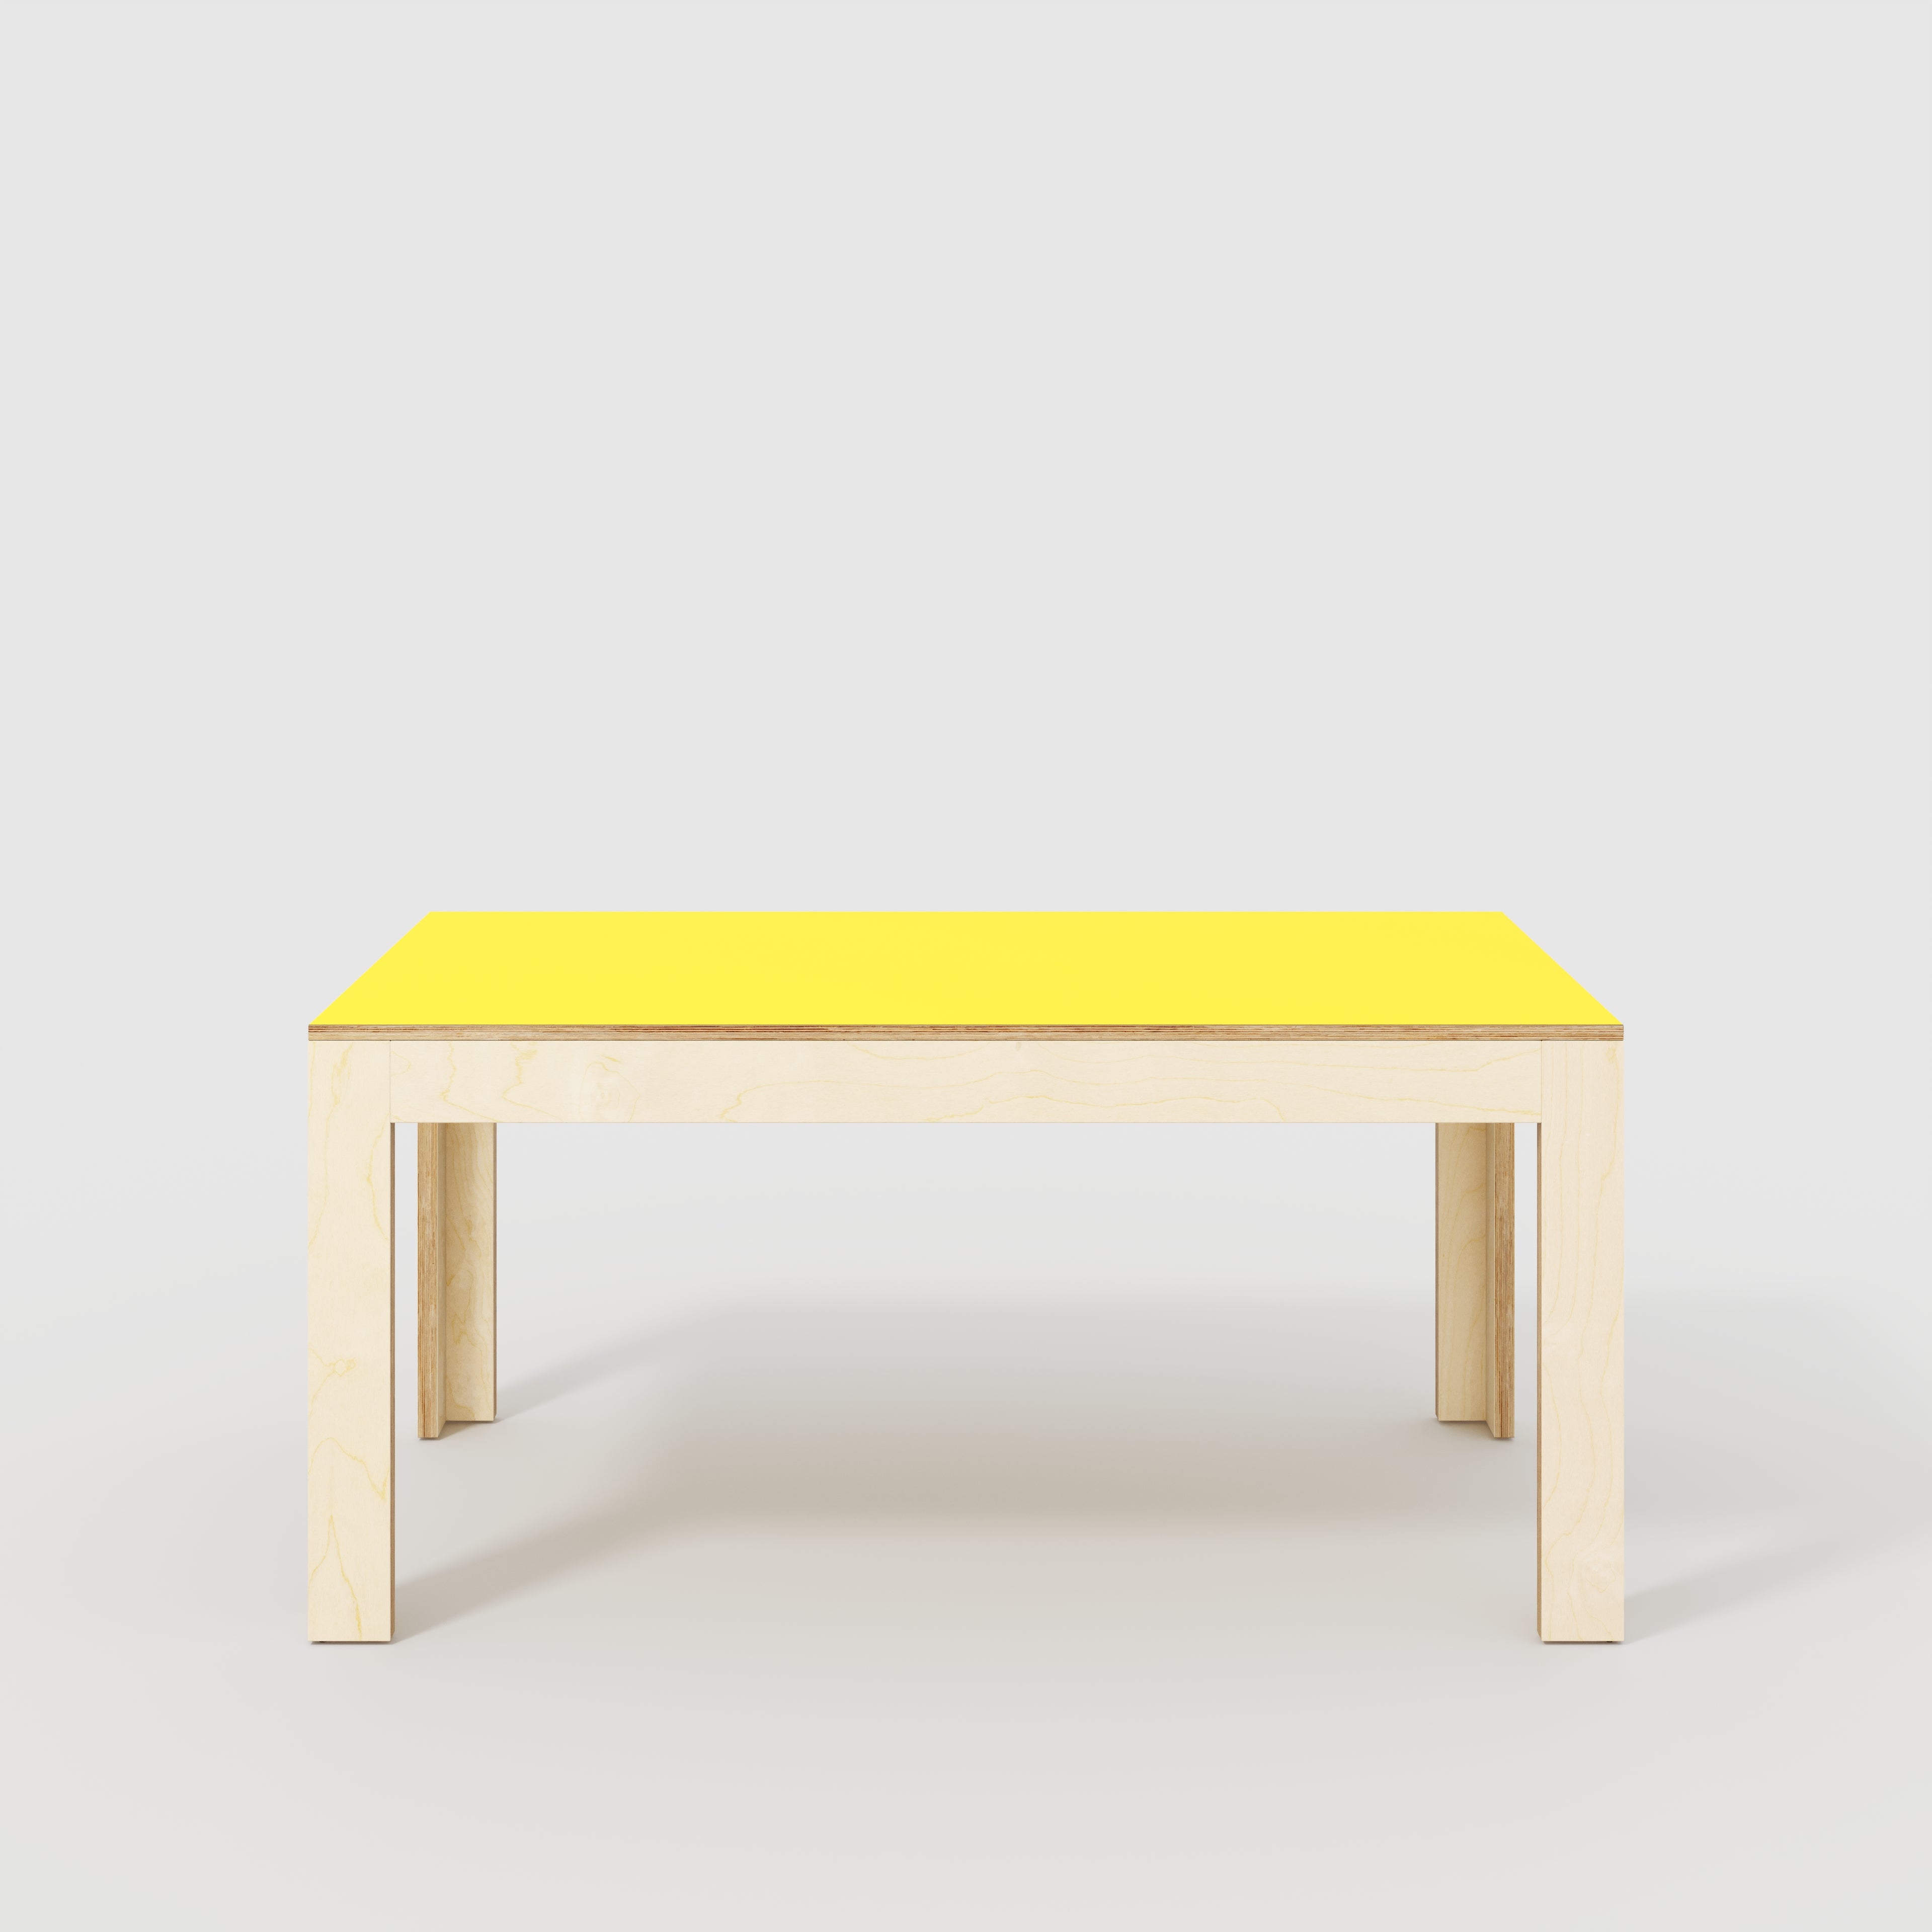 Table with Solid Frame - Formica Chrome Yellow - 1600(w) x 800(d) x 750(h)